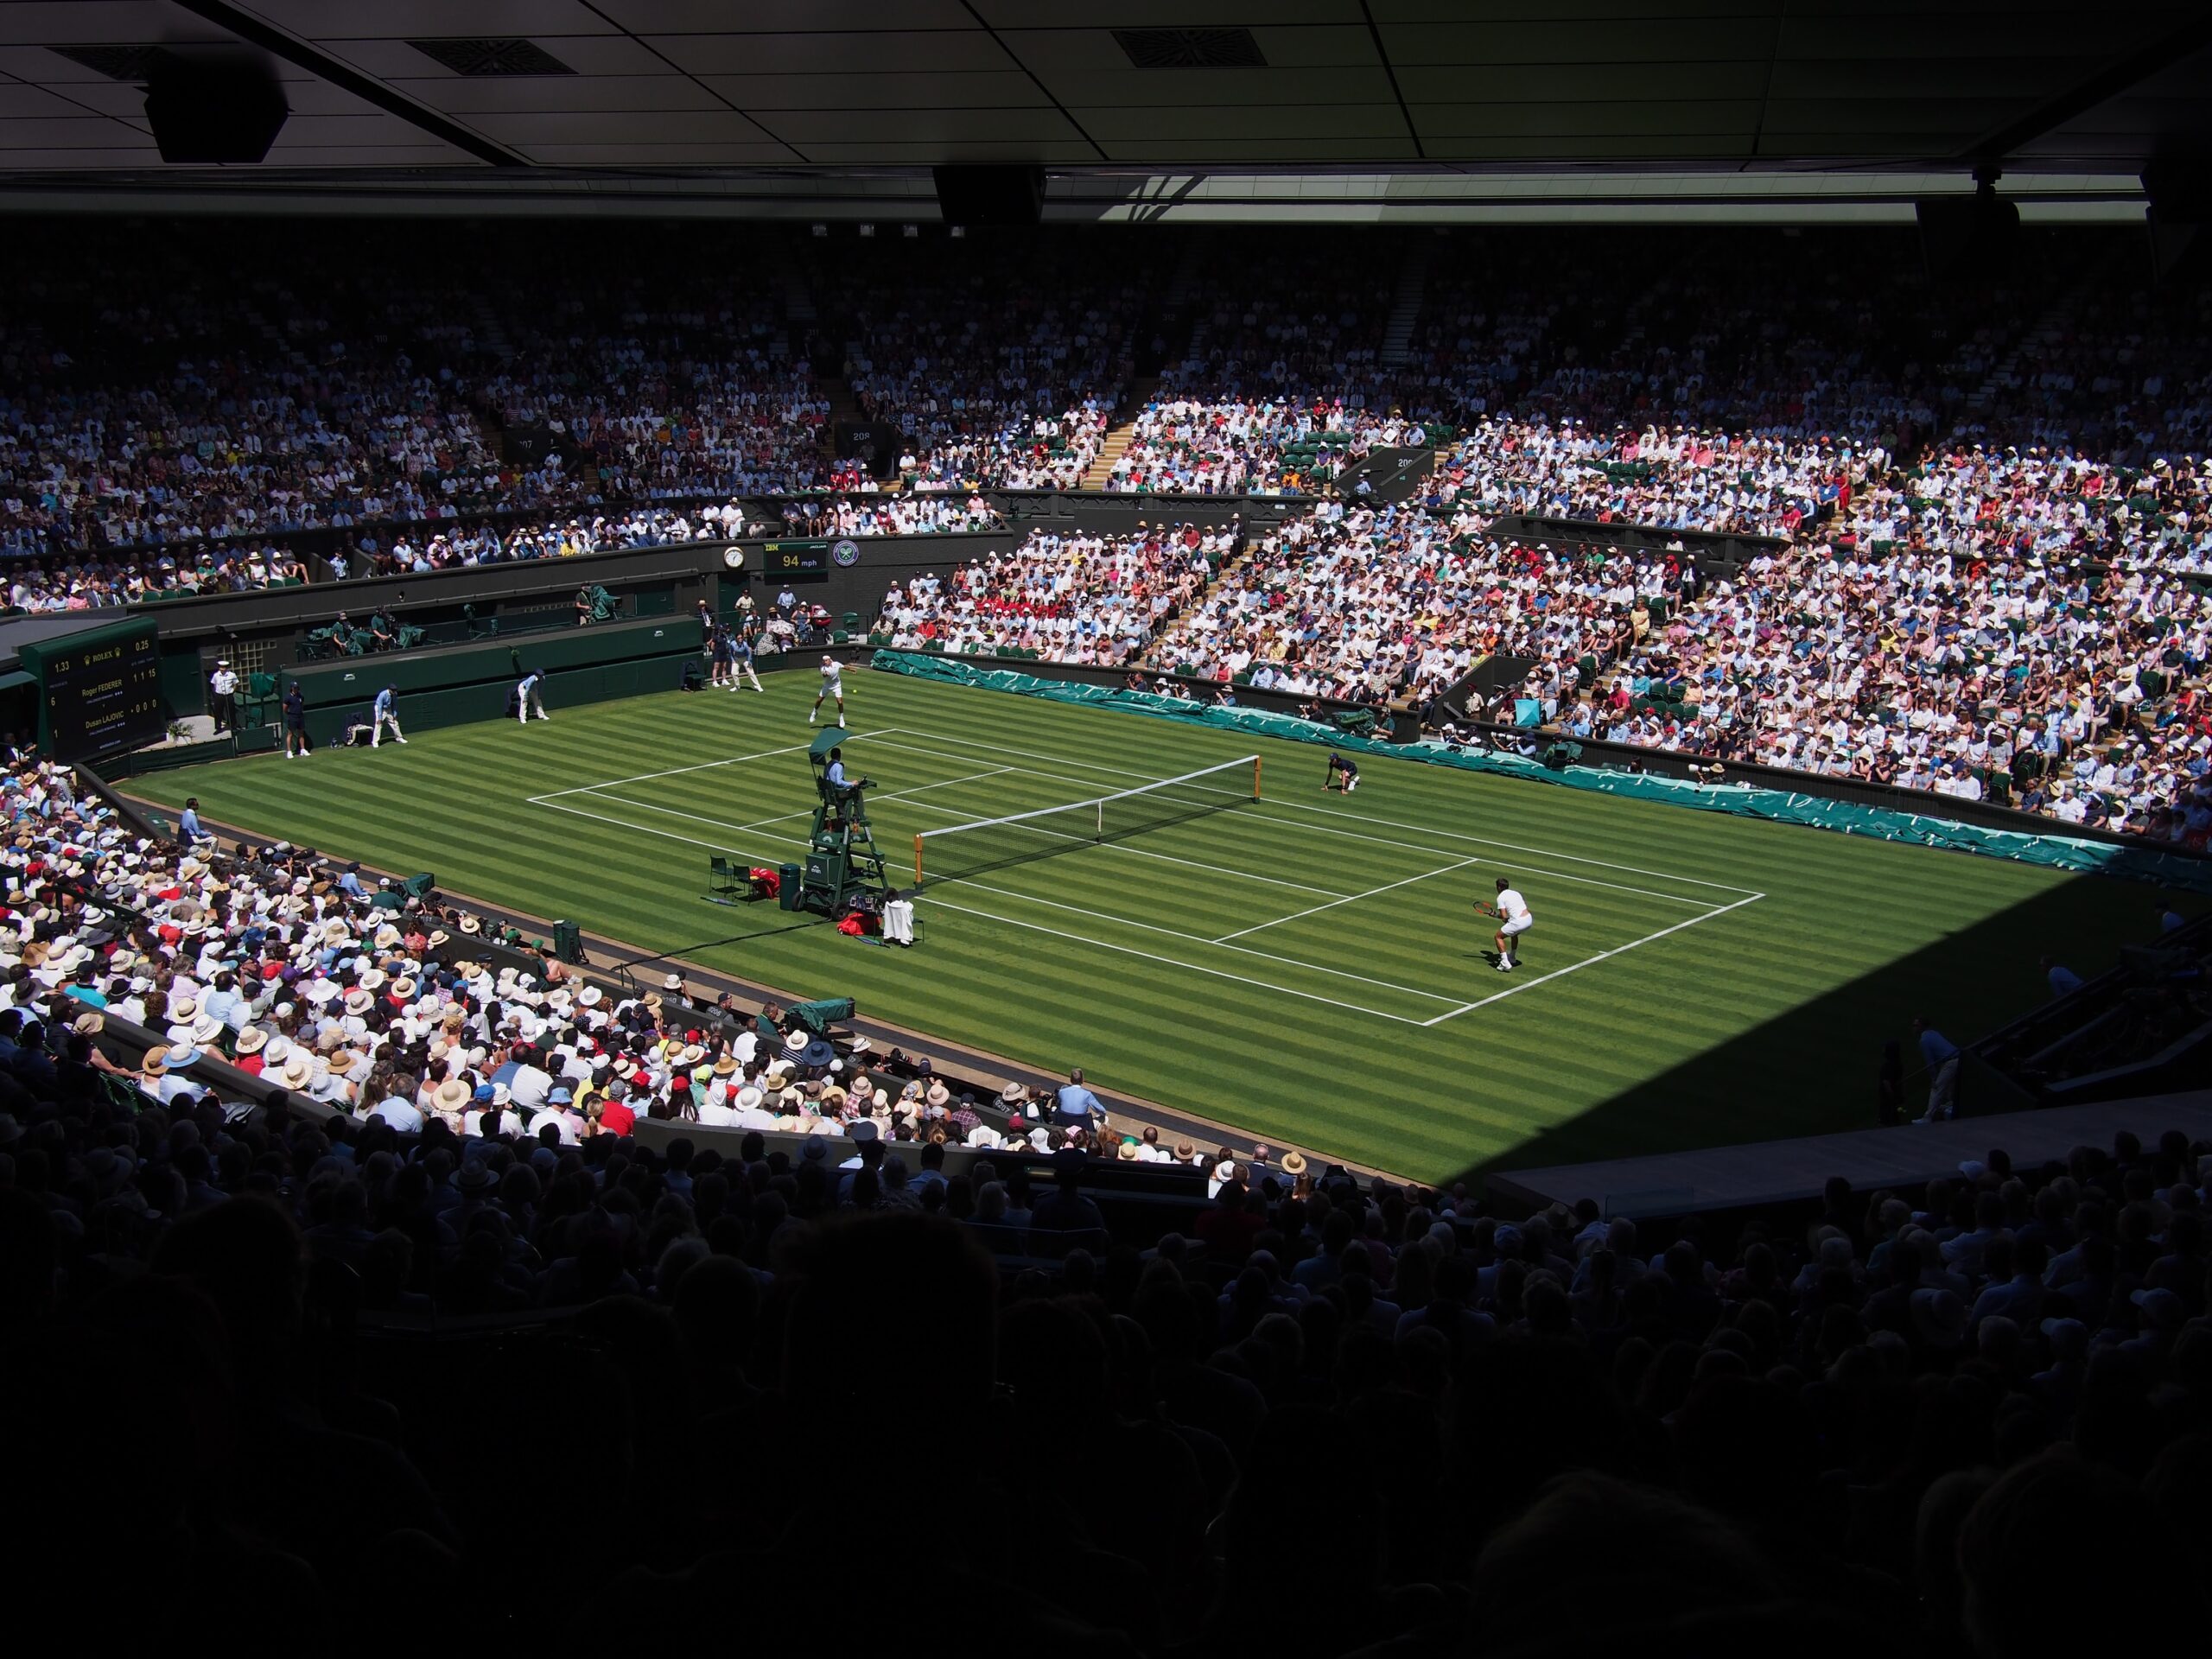 Hospitality waste – what can we learn from Wimbledon?